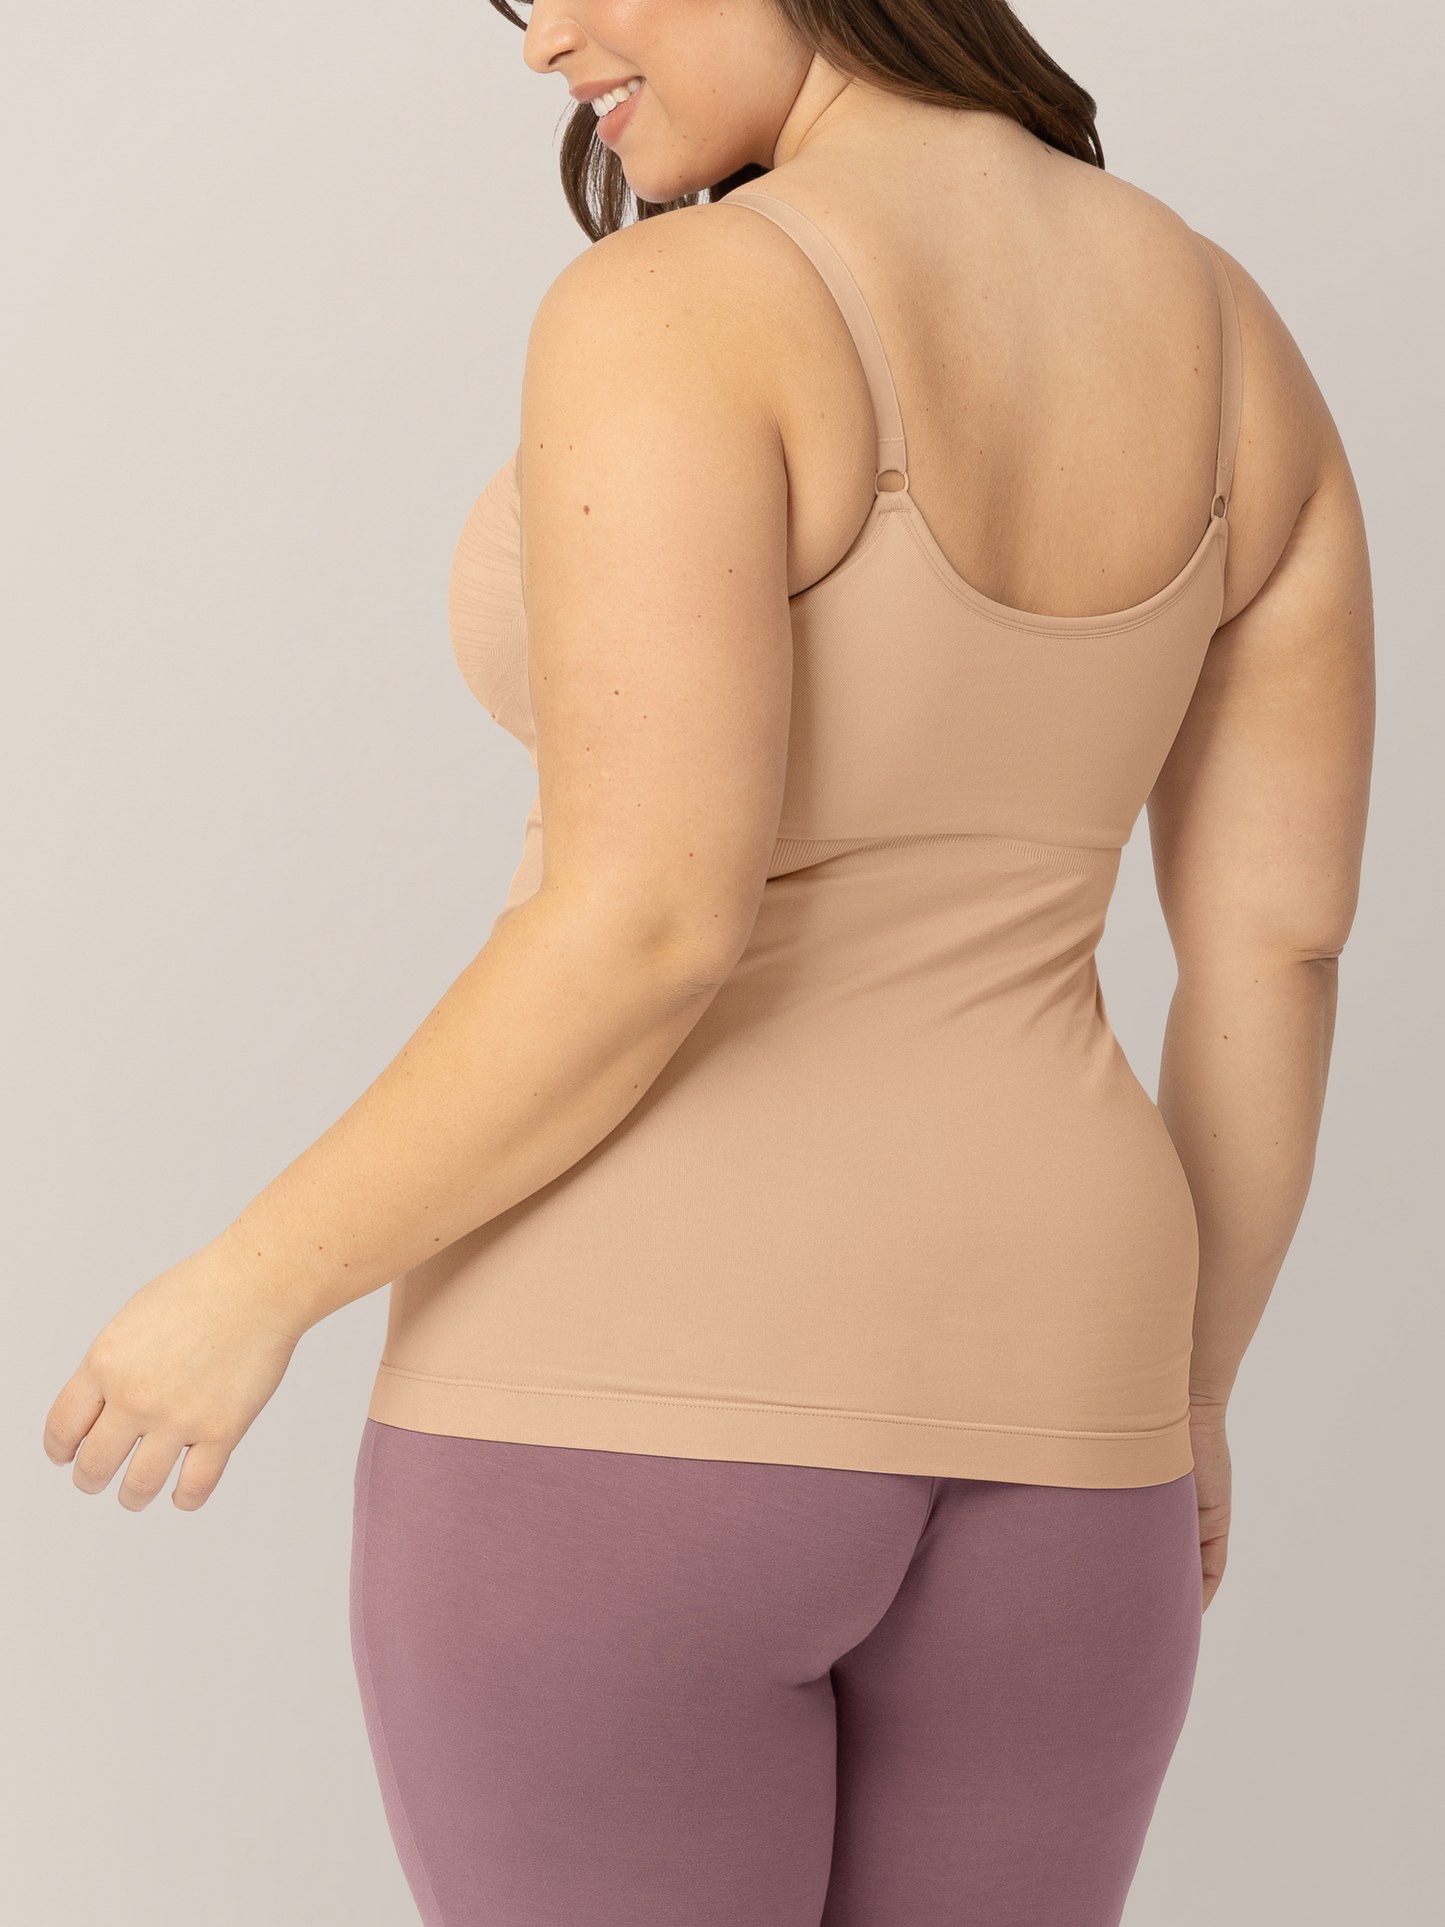 Back of a model wearing the Sublime® Hands-Free Pumping & Nursing Tank in Beige